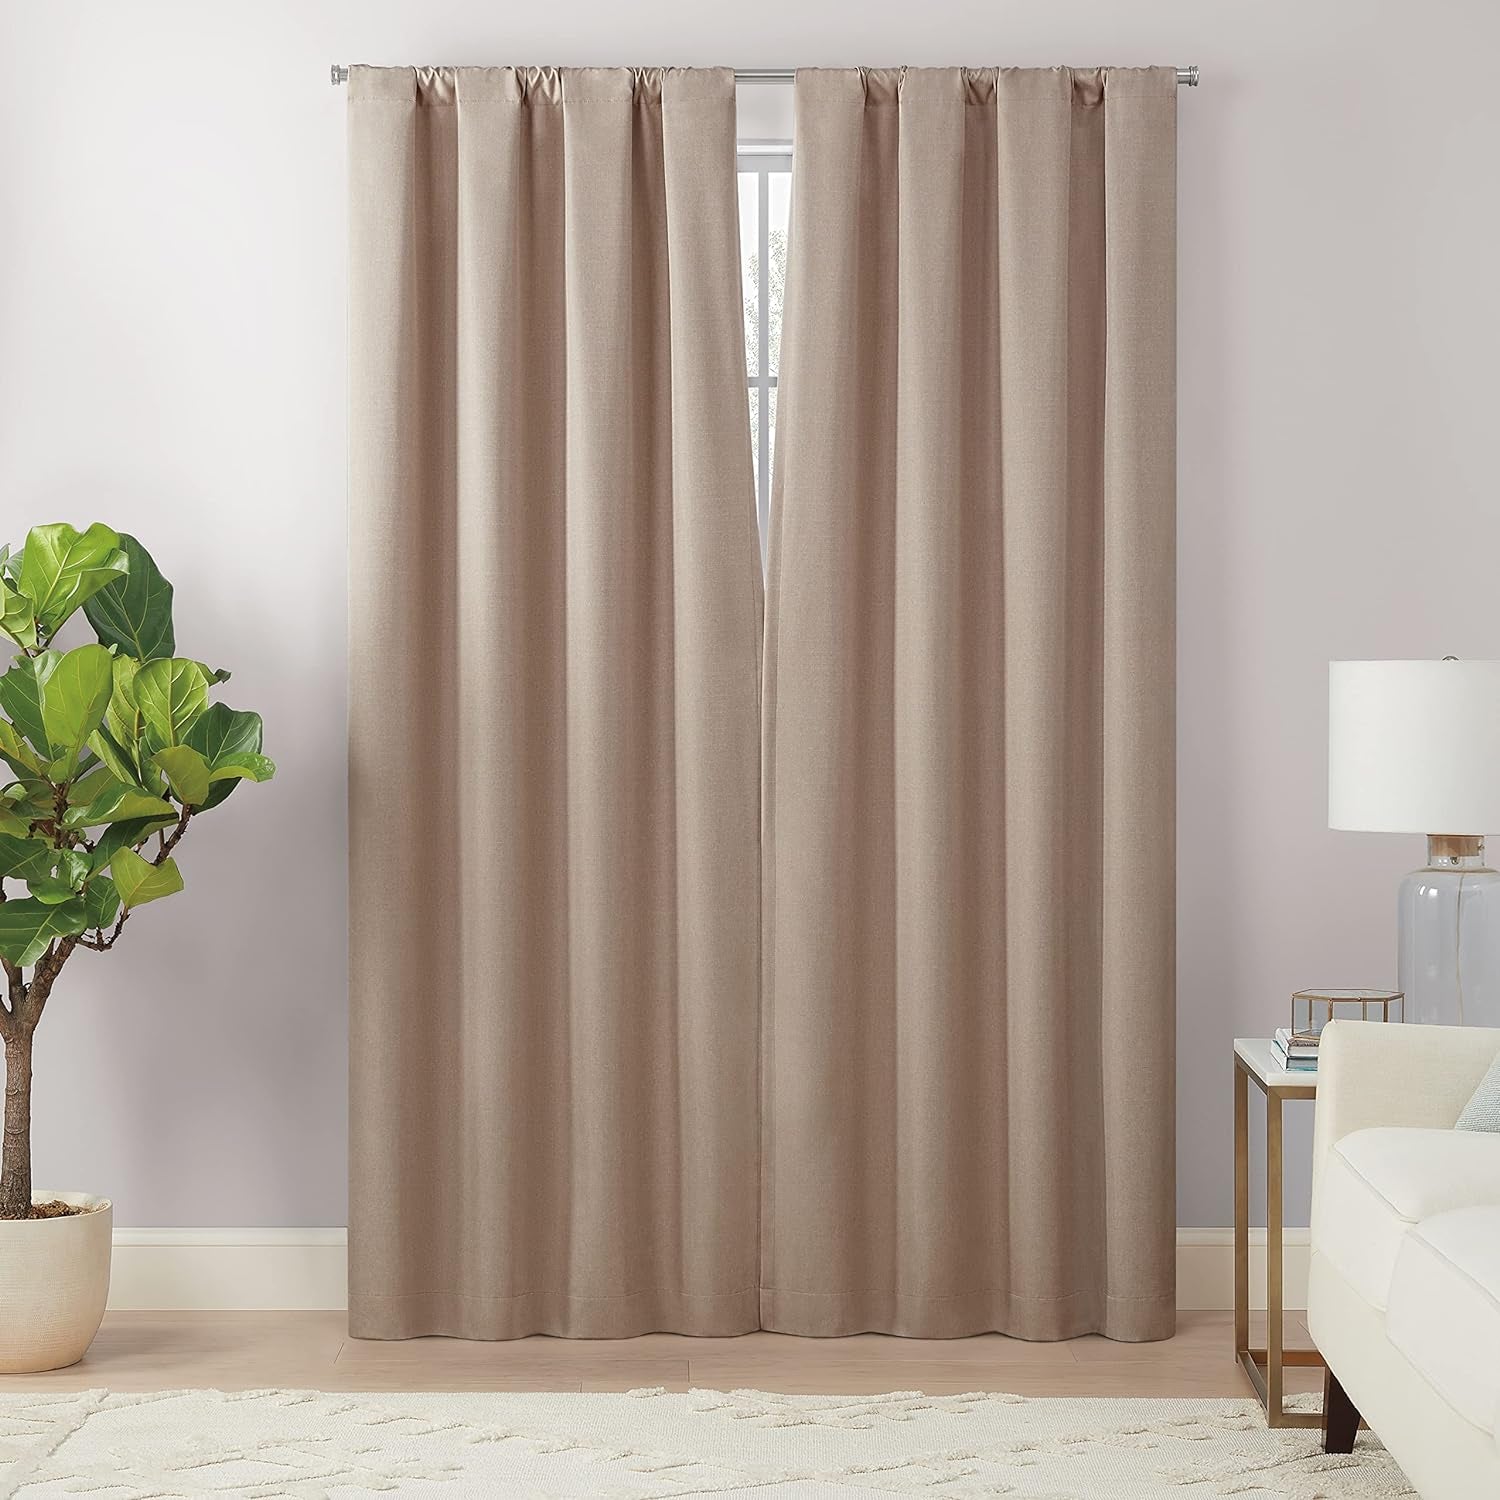 Eclipse Cannes Magnitech 100% Blackout Curtain, Rod Pocket Window Curtain Panel, Seamless Magnetic Closure for Bedroom, Living Room or Nursery, 63 in Long X 40 in Wide, (1 Panel), Natural/ Linen  KEECO   